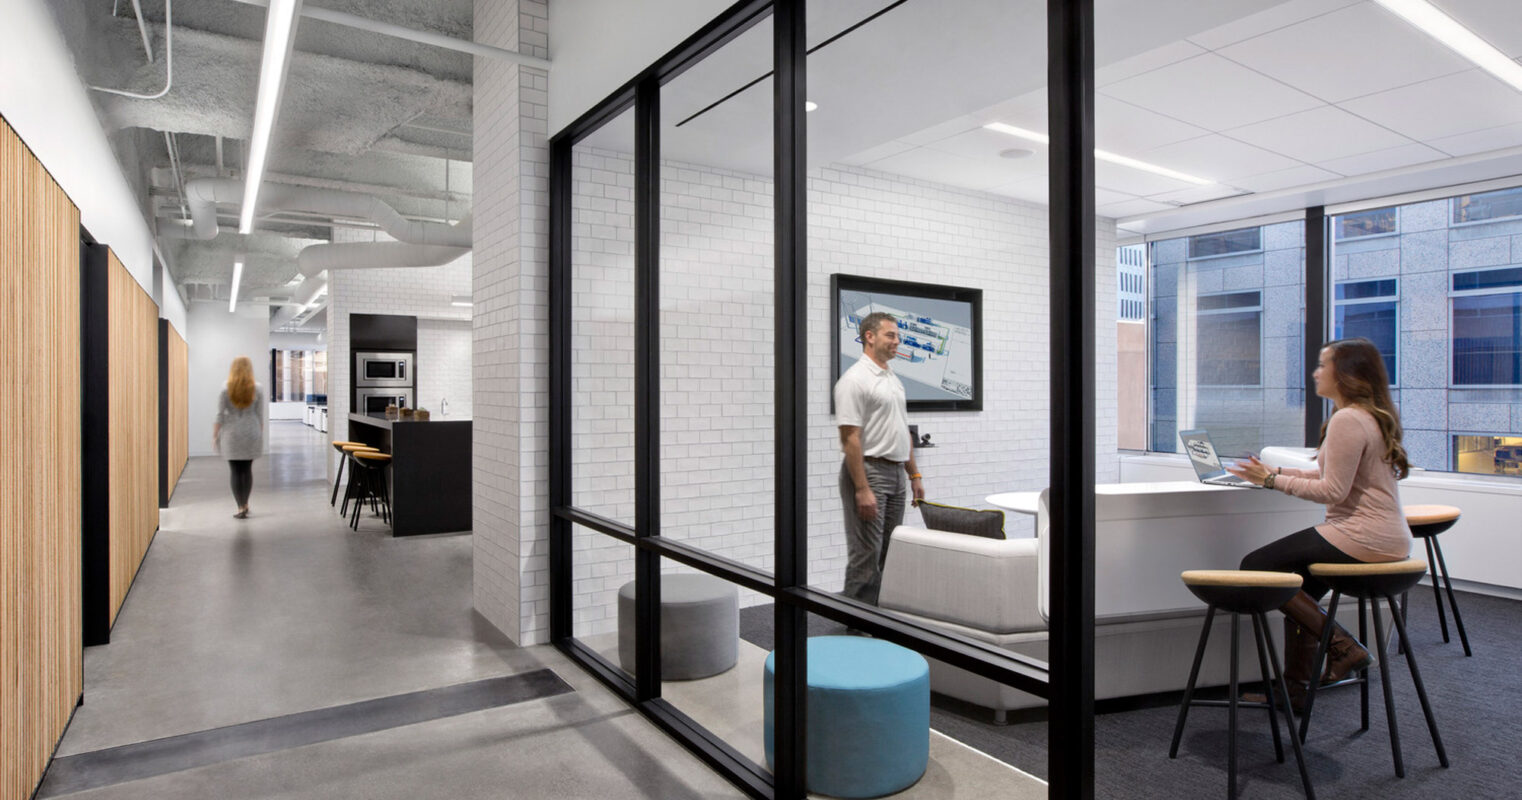 Modern office space showcasing a balance of natural and artificial lighting, with open-concept seating and private glass-walled rooms, juxtaposing exposed concrete ceilings against warm wooden accents and sleek furniture.